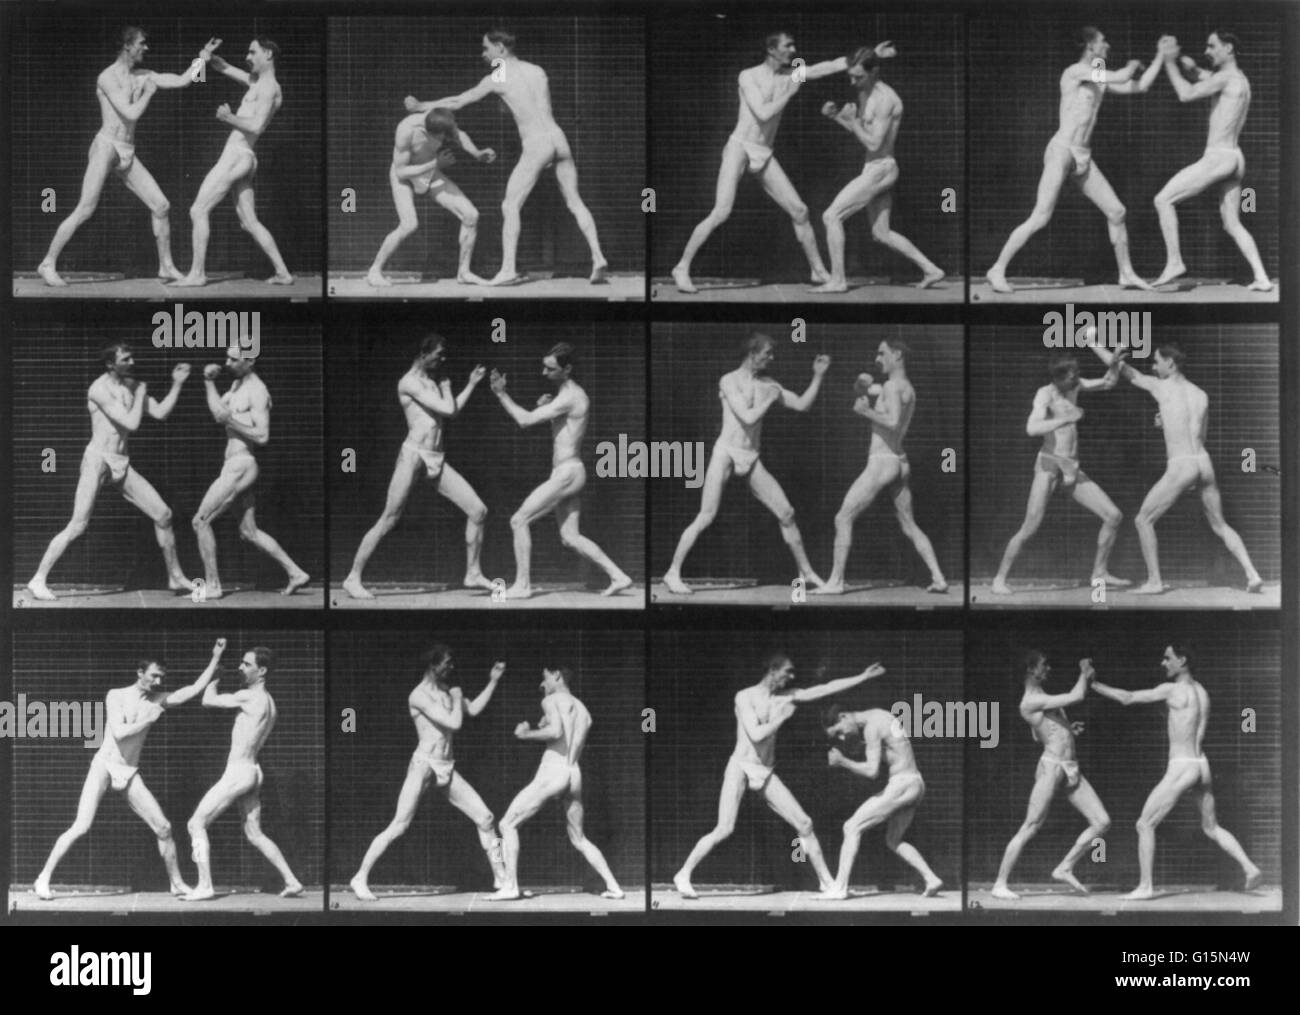 Muybridge Human Locomotion, Men Boxing, 1887. 12 frame motion picture of two men boxing. Eadweard James Muybridge (April 9, 1830 - May 8, 1904) was an English photographer important for his pioneering work in photographic studies of motion and in motion-p Stock Photo